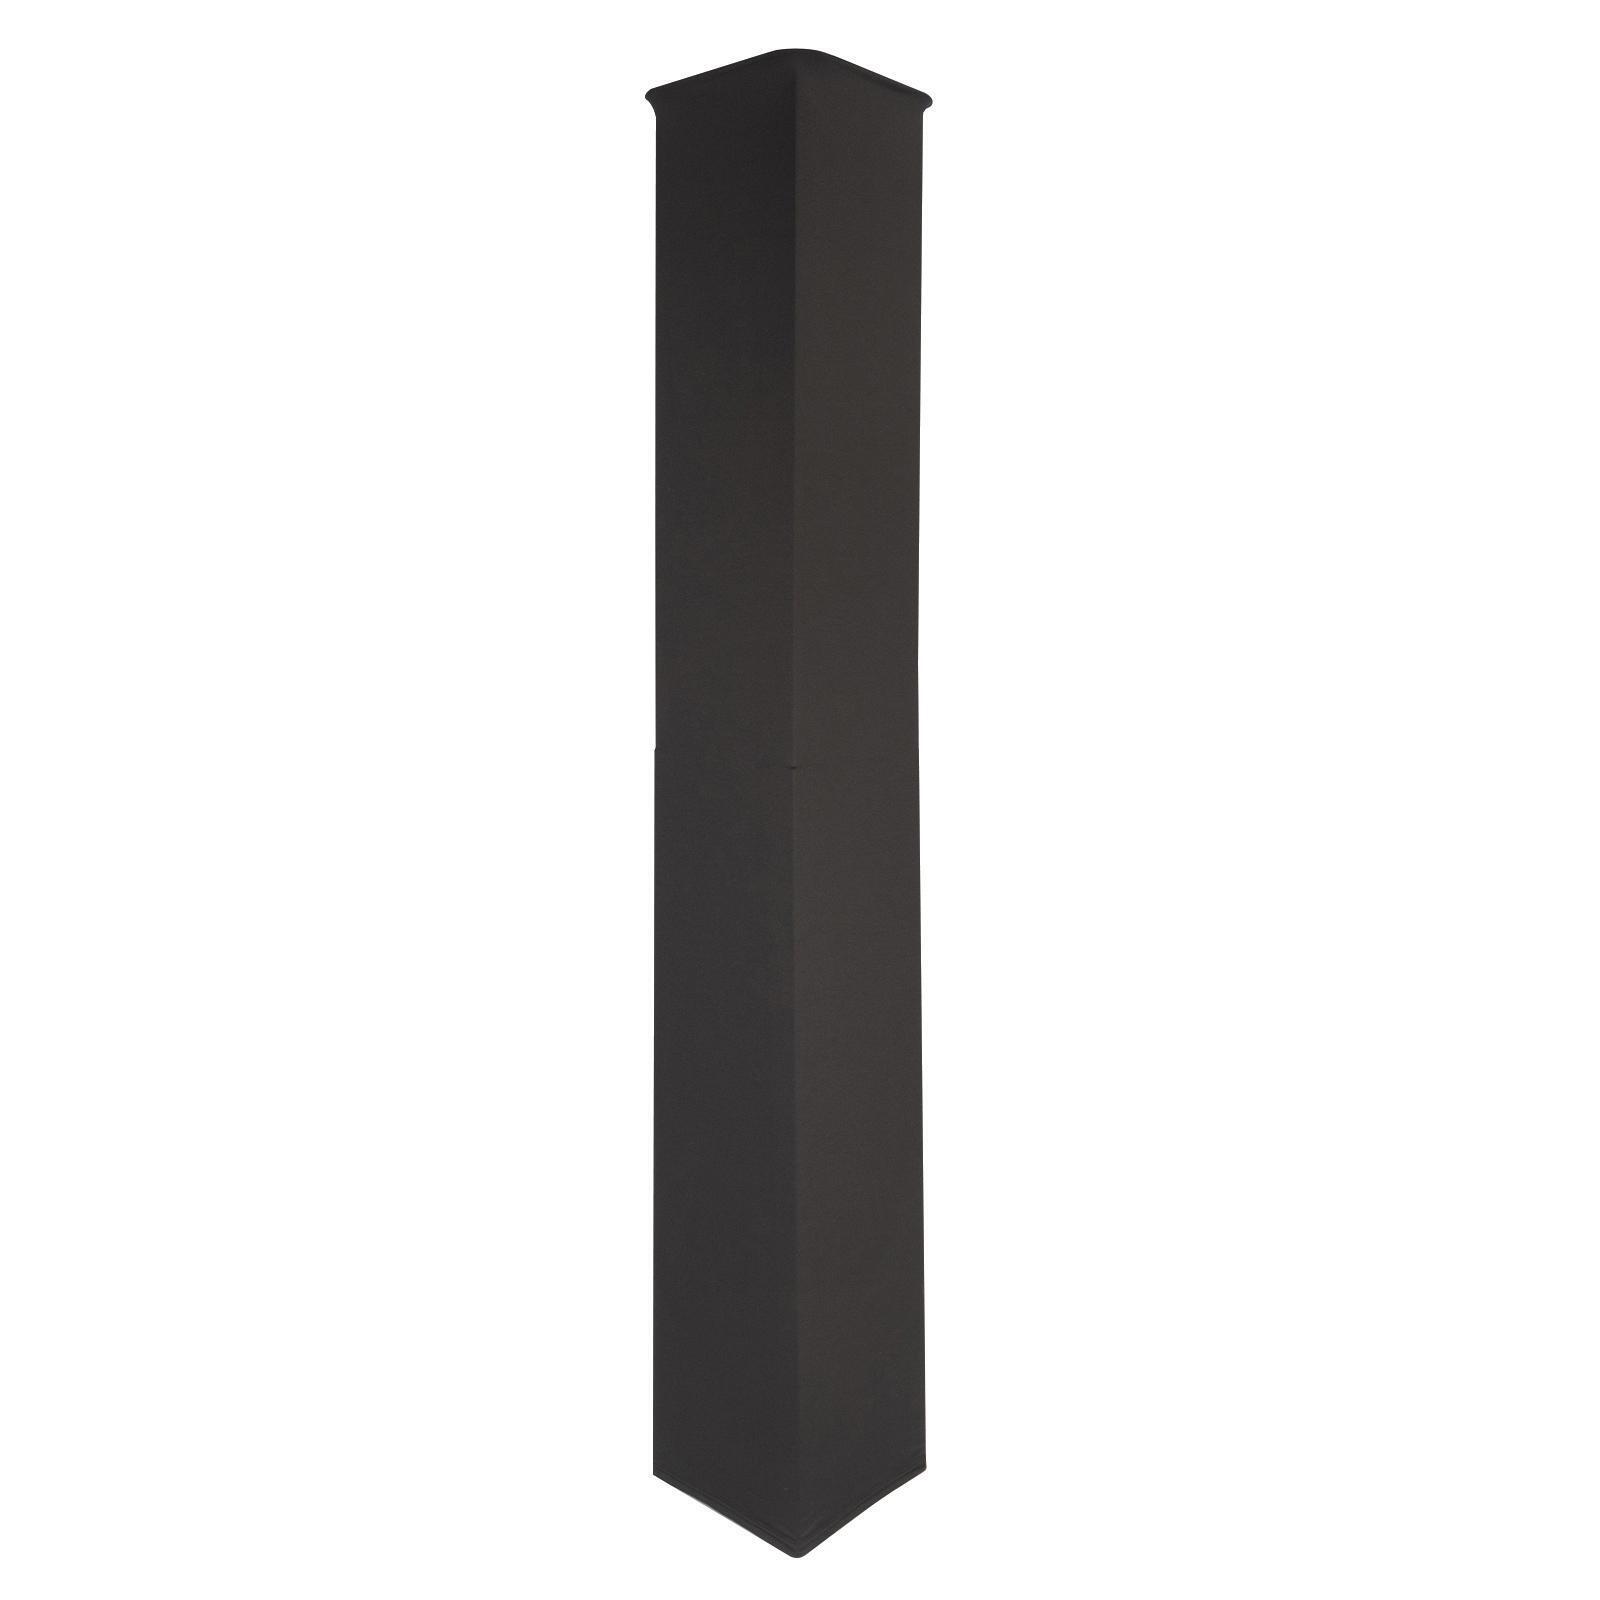 Colorkey Cku-8022 Black Replacement Scrim Cover For Ls6 Podium Stand Idjnow